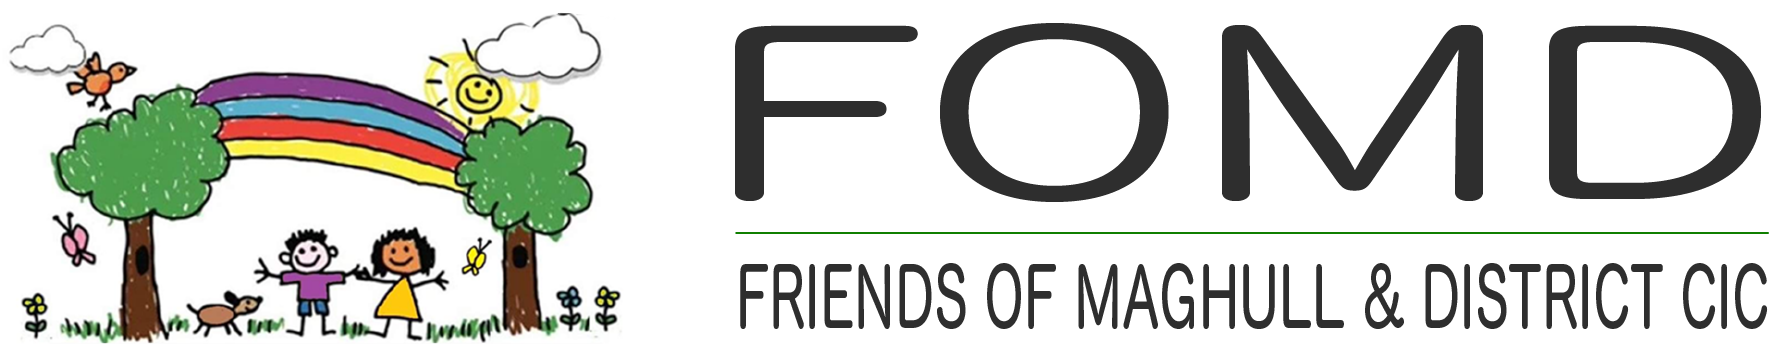 Friends of Maghull and District CIC